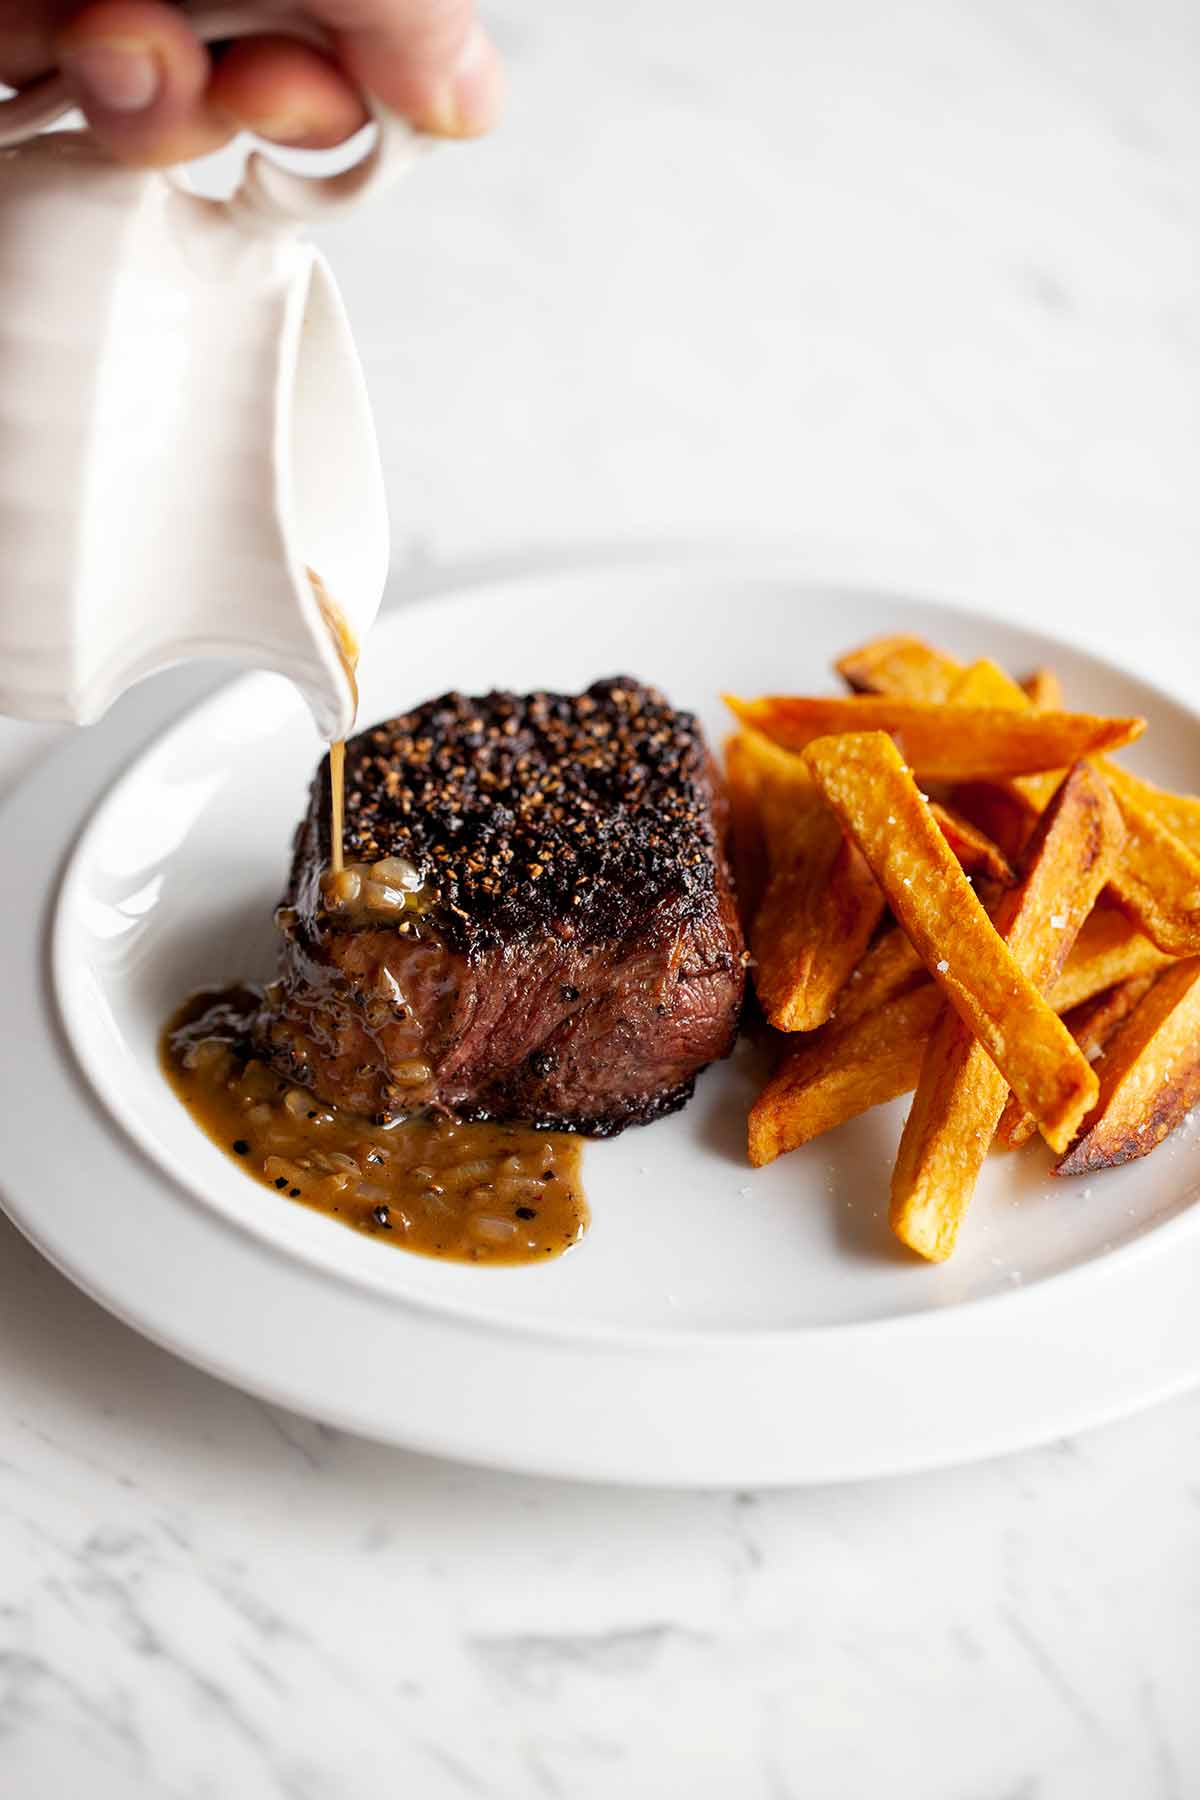 A person drizzling sauce over a steak au poivre on a white plate with sweet potato fries.